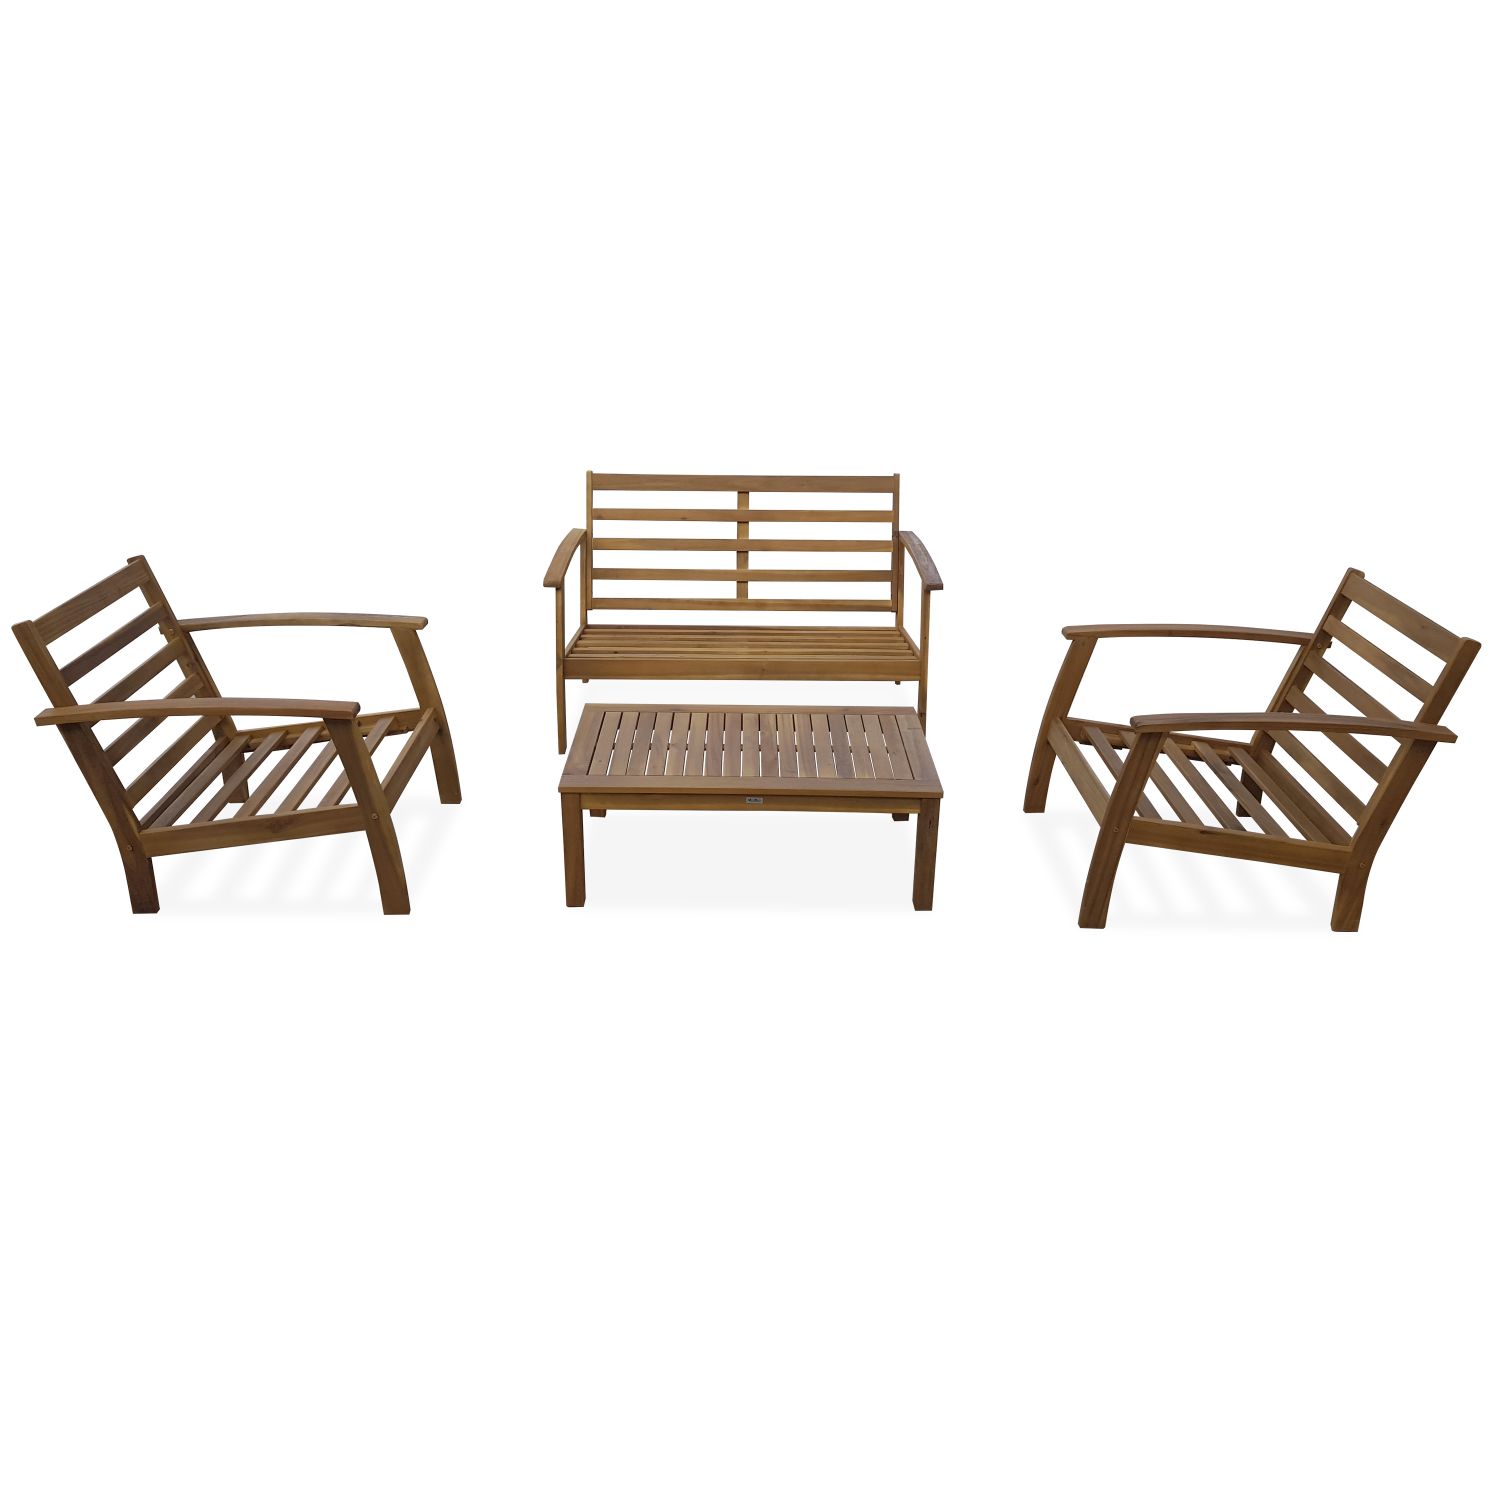 USHUAIA Outdoor Lounge 4 Seater Wood | Off-white cushions